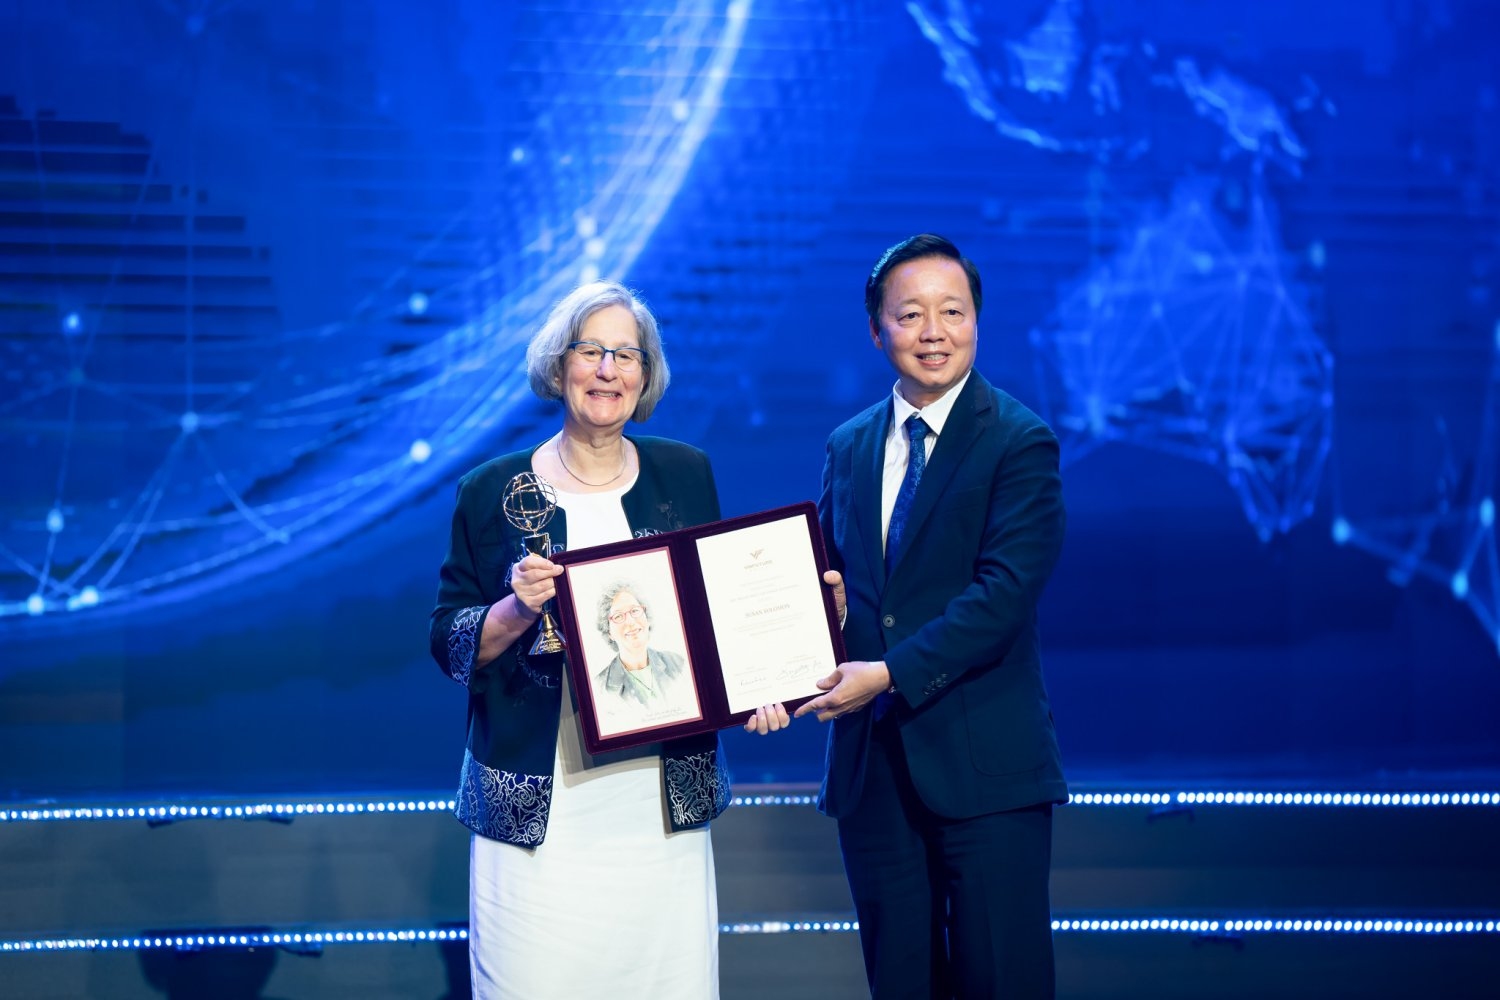 Vietnam’s Deputy Prime Minister Tran Hong Ha presented Susan Solomon with the VinFuture Award for Female Innovator at an award ceremony on Dec. 20 in Hanoi, Vietnam. Solomon was recognized for her work on ozone depletion and the creation of the Montreal Protocol.